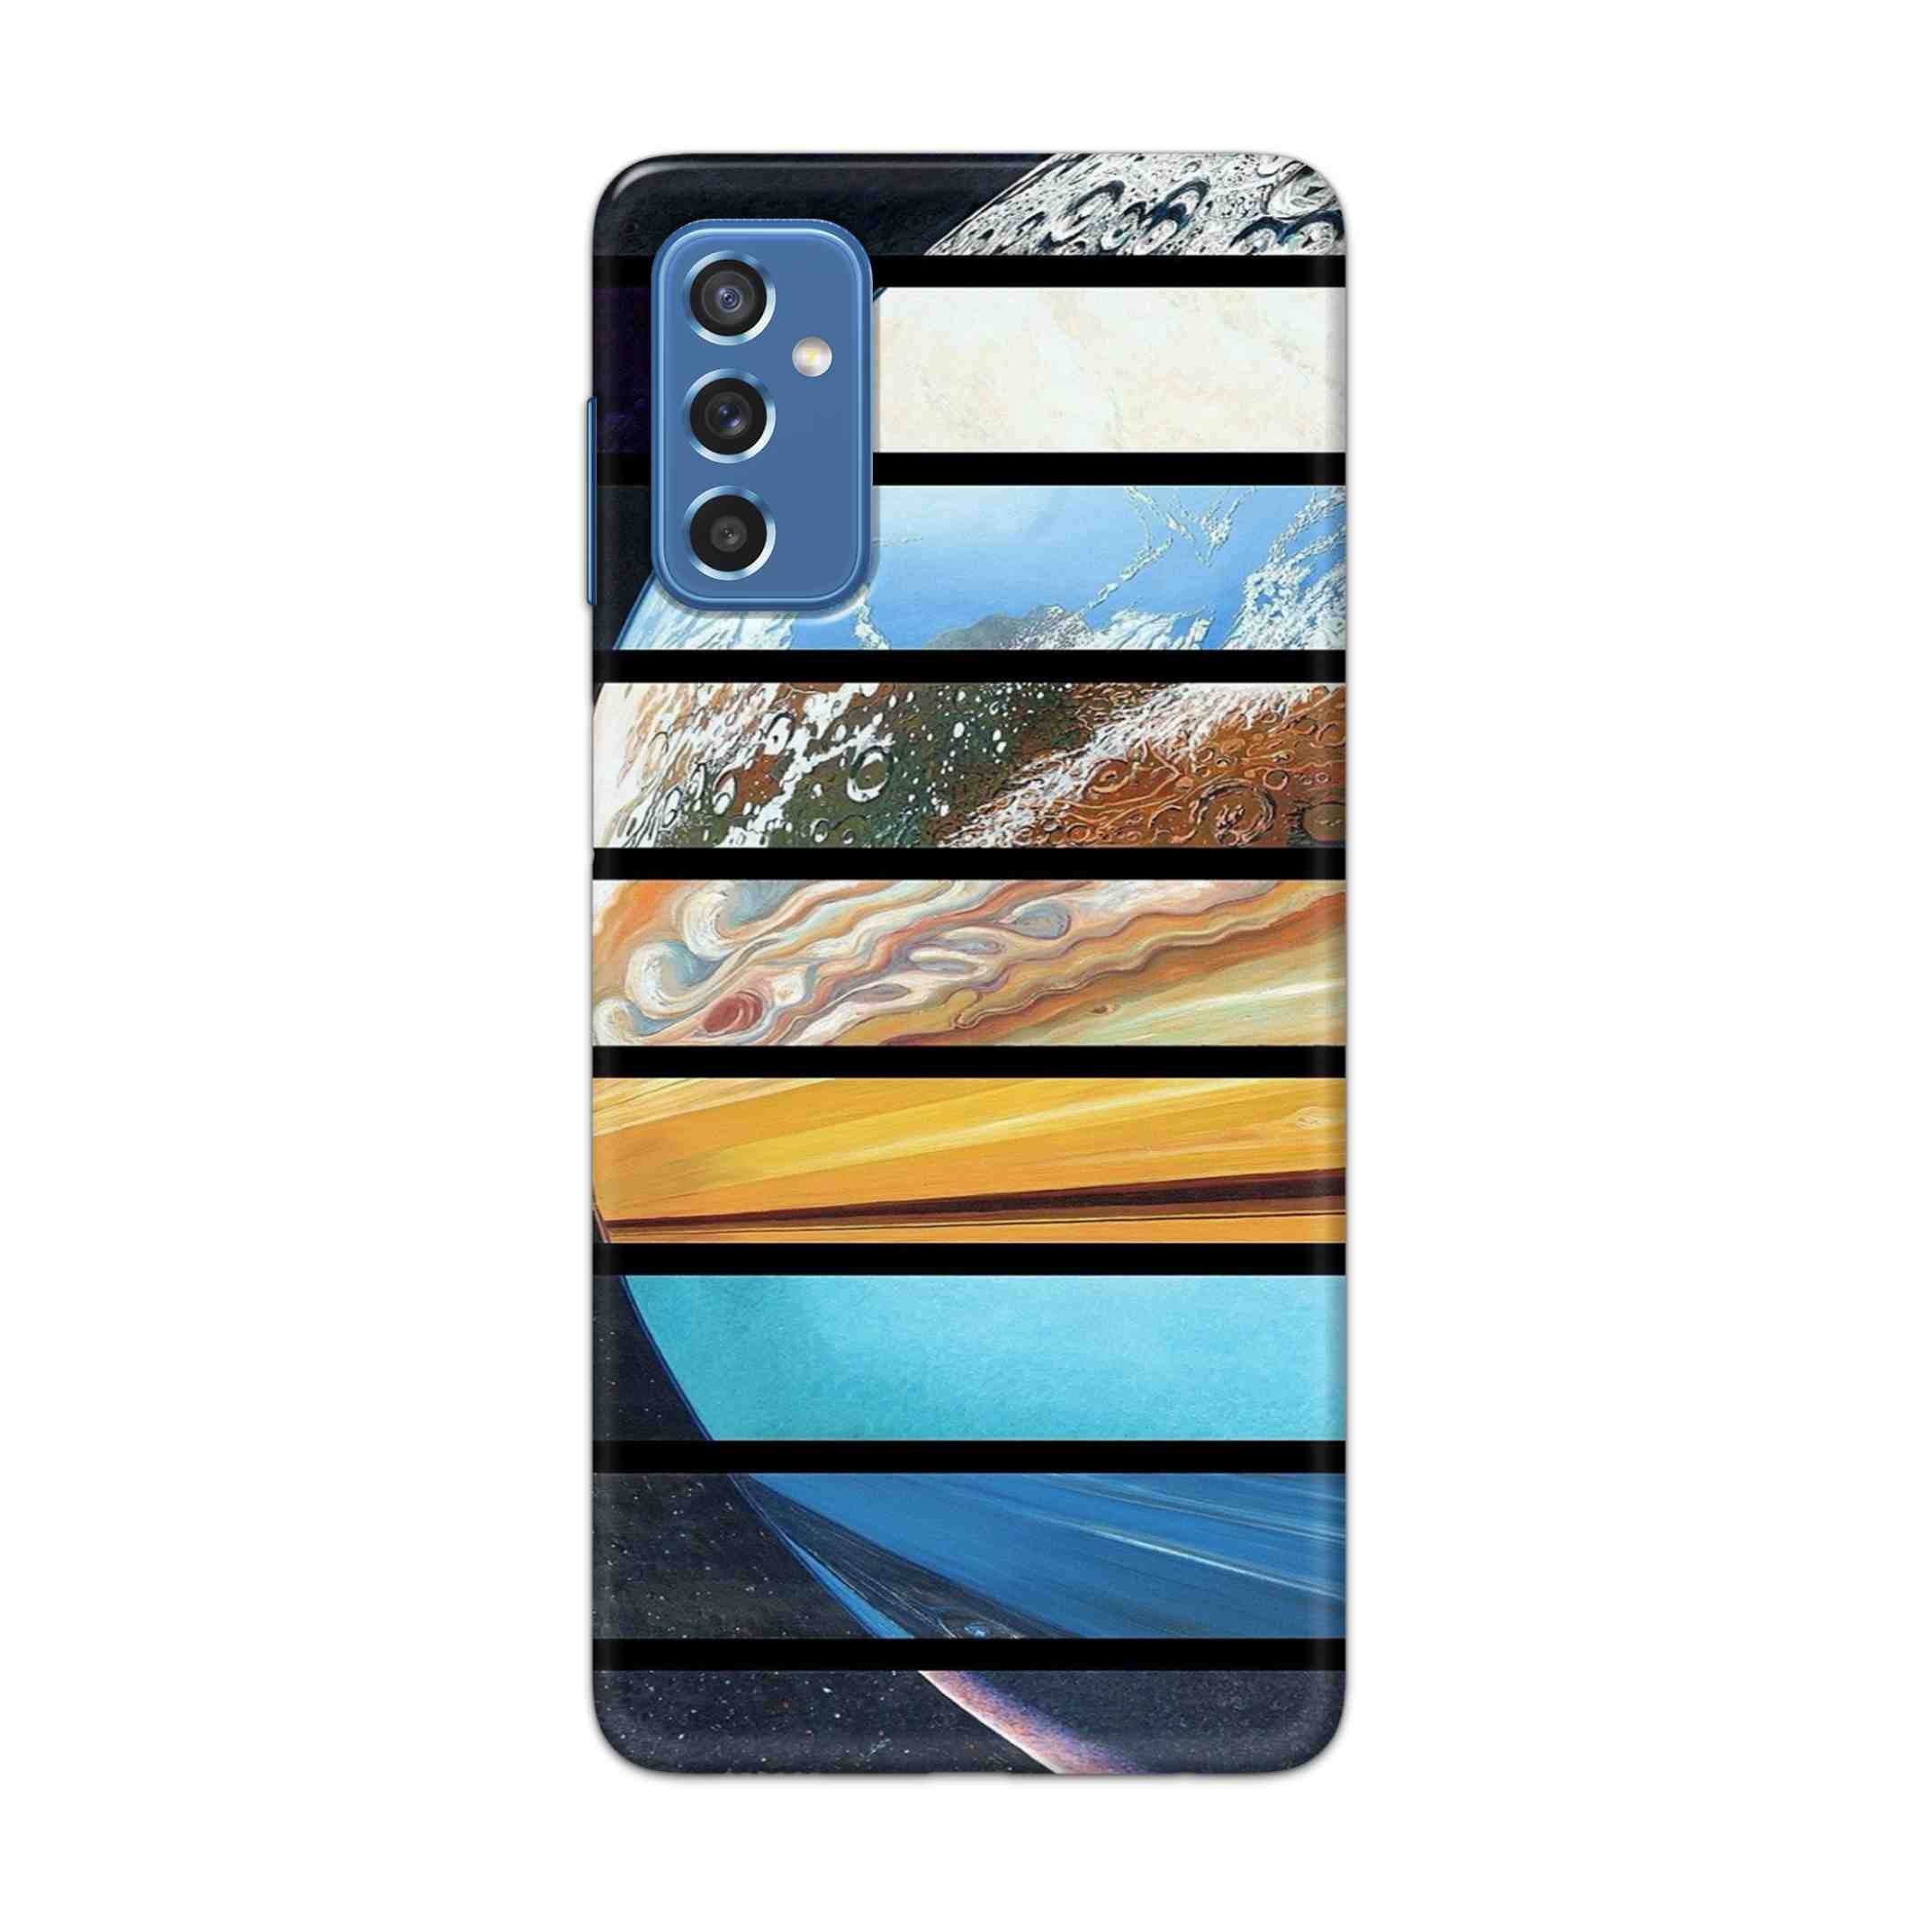 Buy Colourful Earth Hard Back Mobile Phone Case Cover For Samsung Galaxy M52 Online